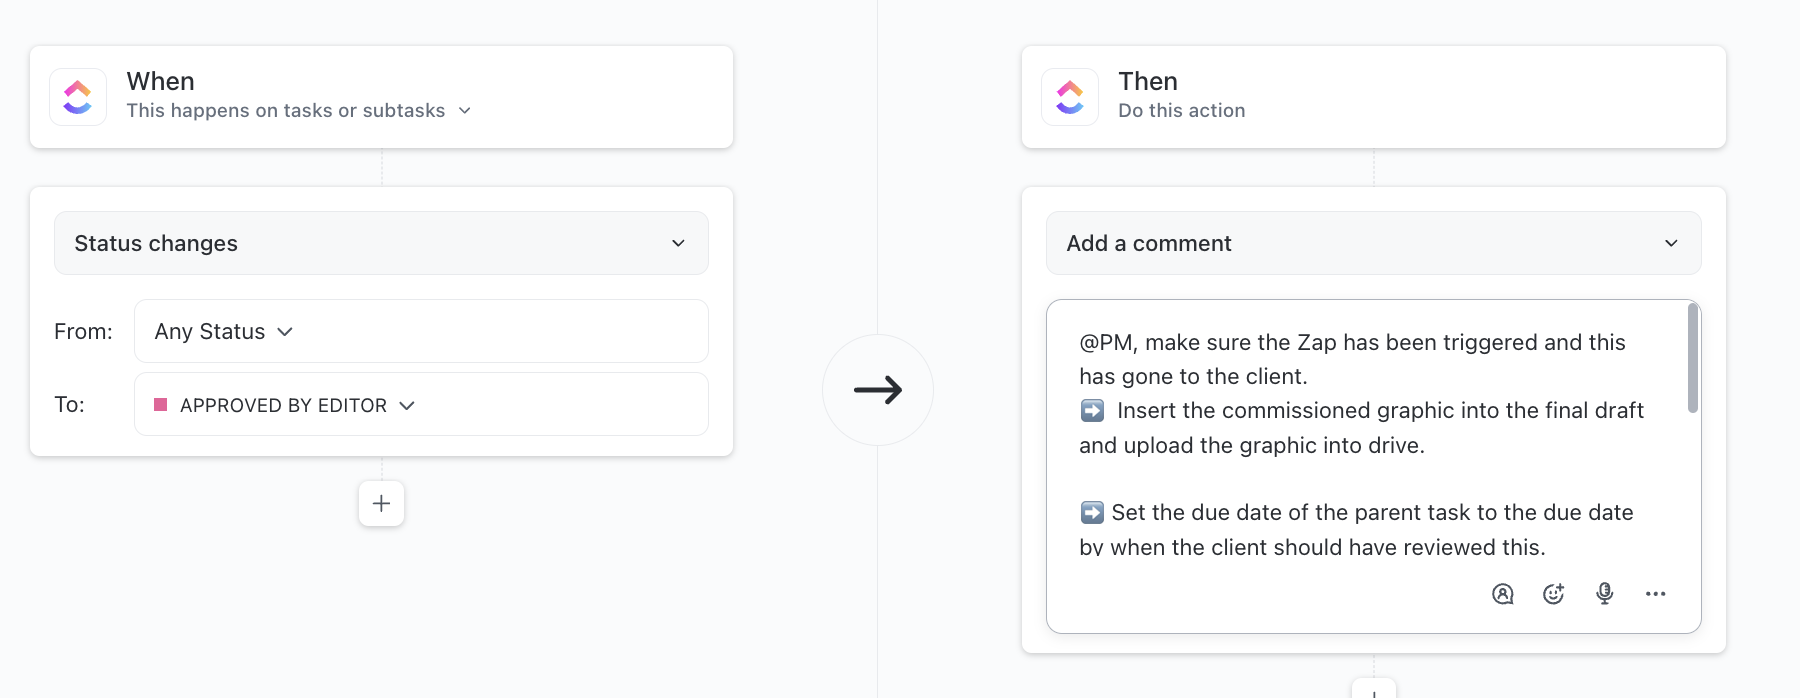 Example of an automation in a content approval workflow: When status is approved by editor, then a comment is automatically added for the Project Manager to check that this has been sent to the client. 